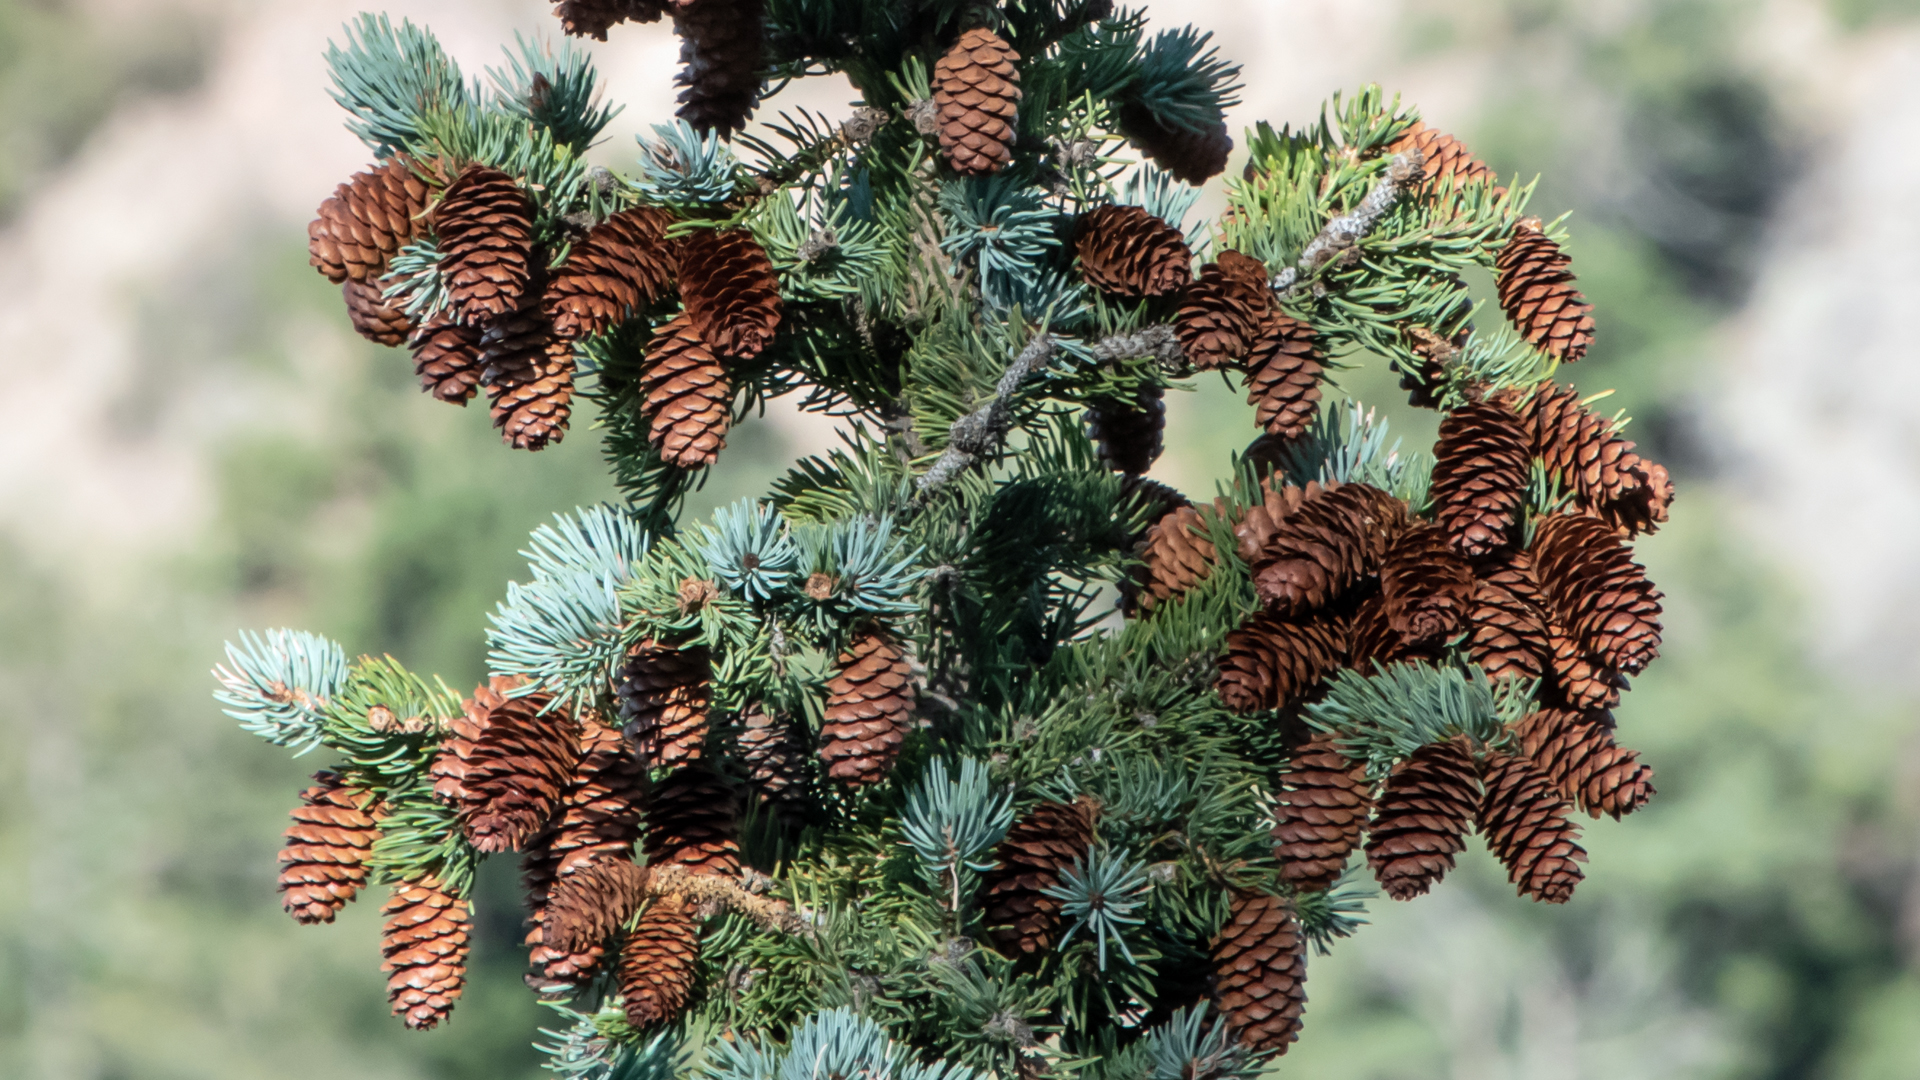 Hanging female cones: must be a spruce or a Douglas Fir